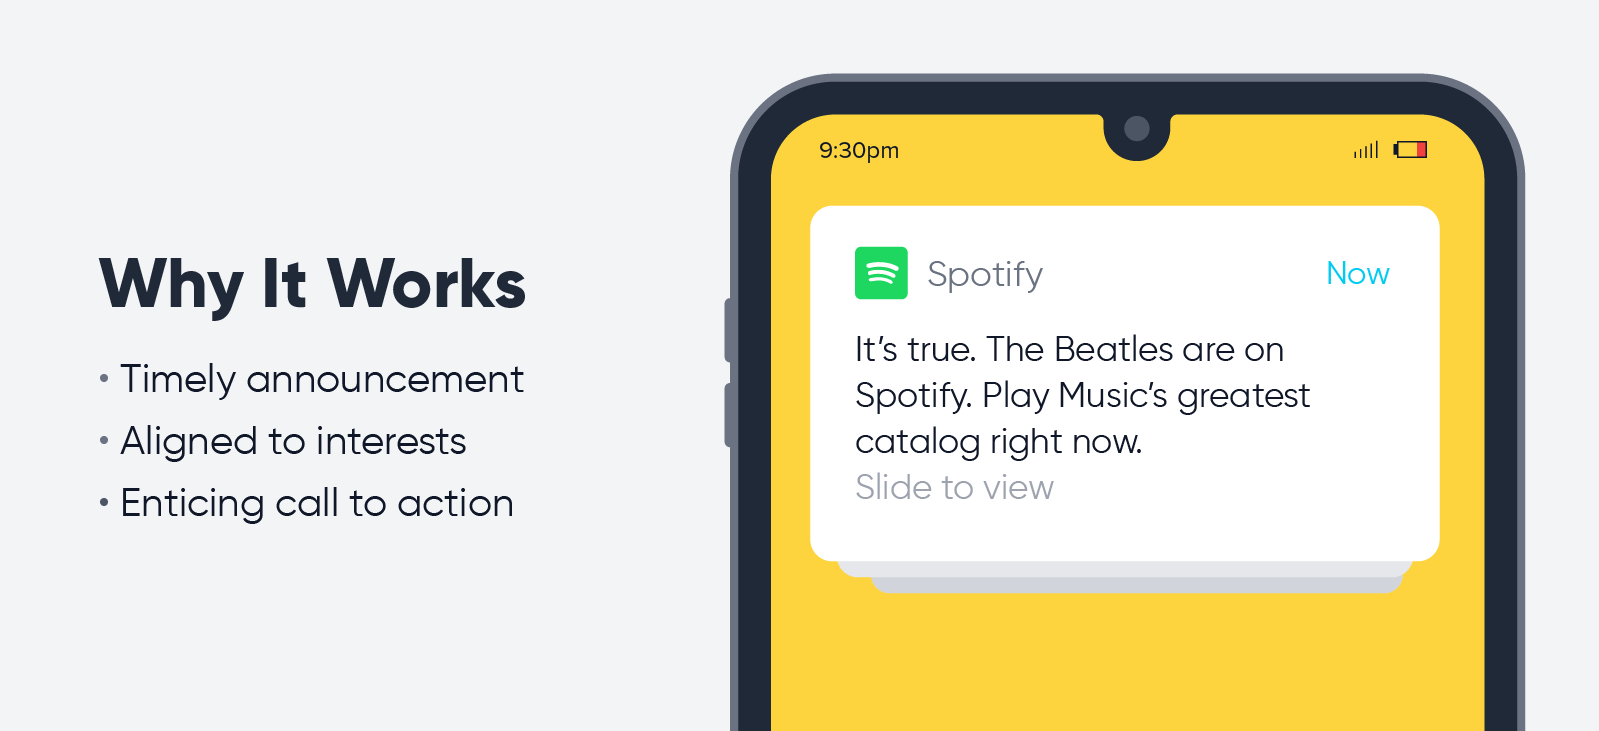 08 - Spotify push notification best practices